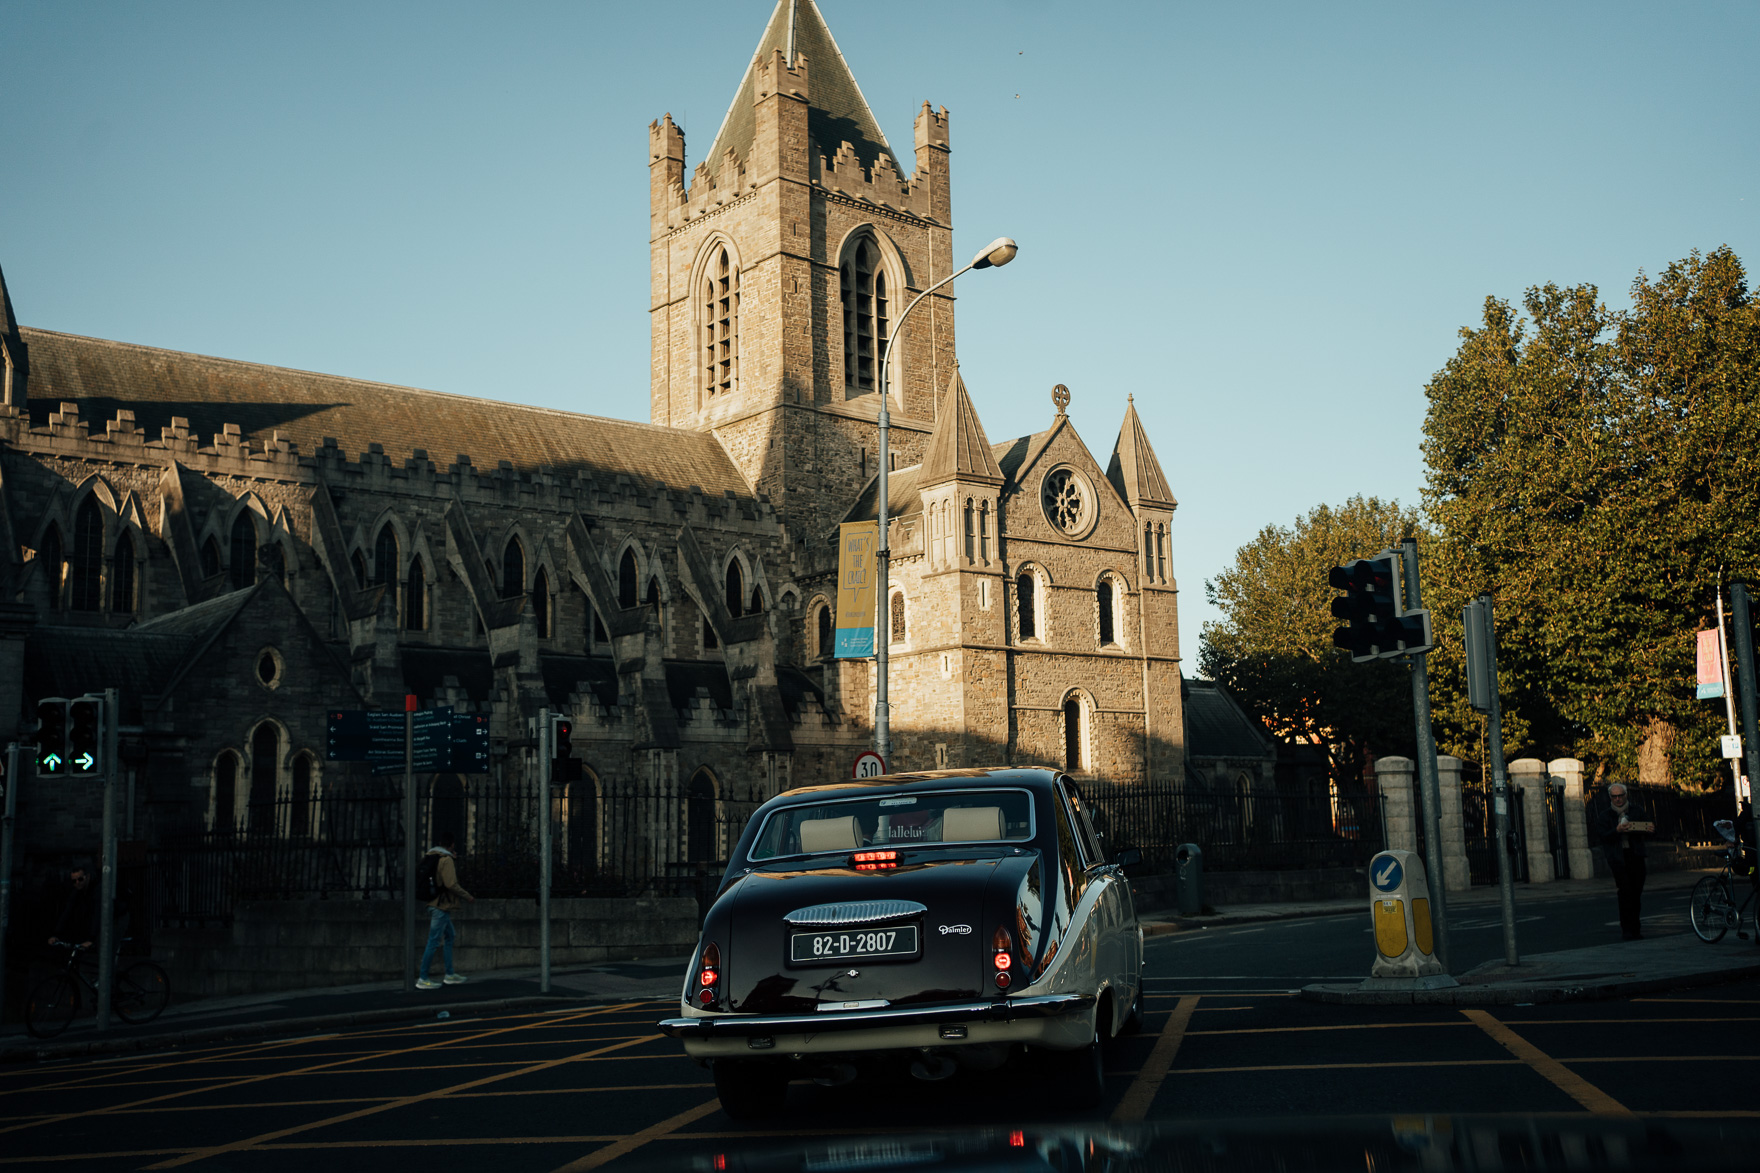 A car parked in front of a church